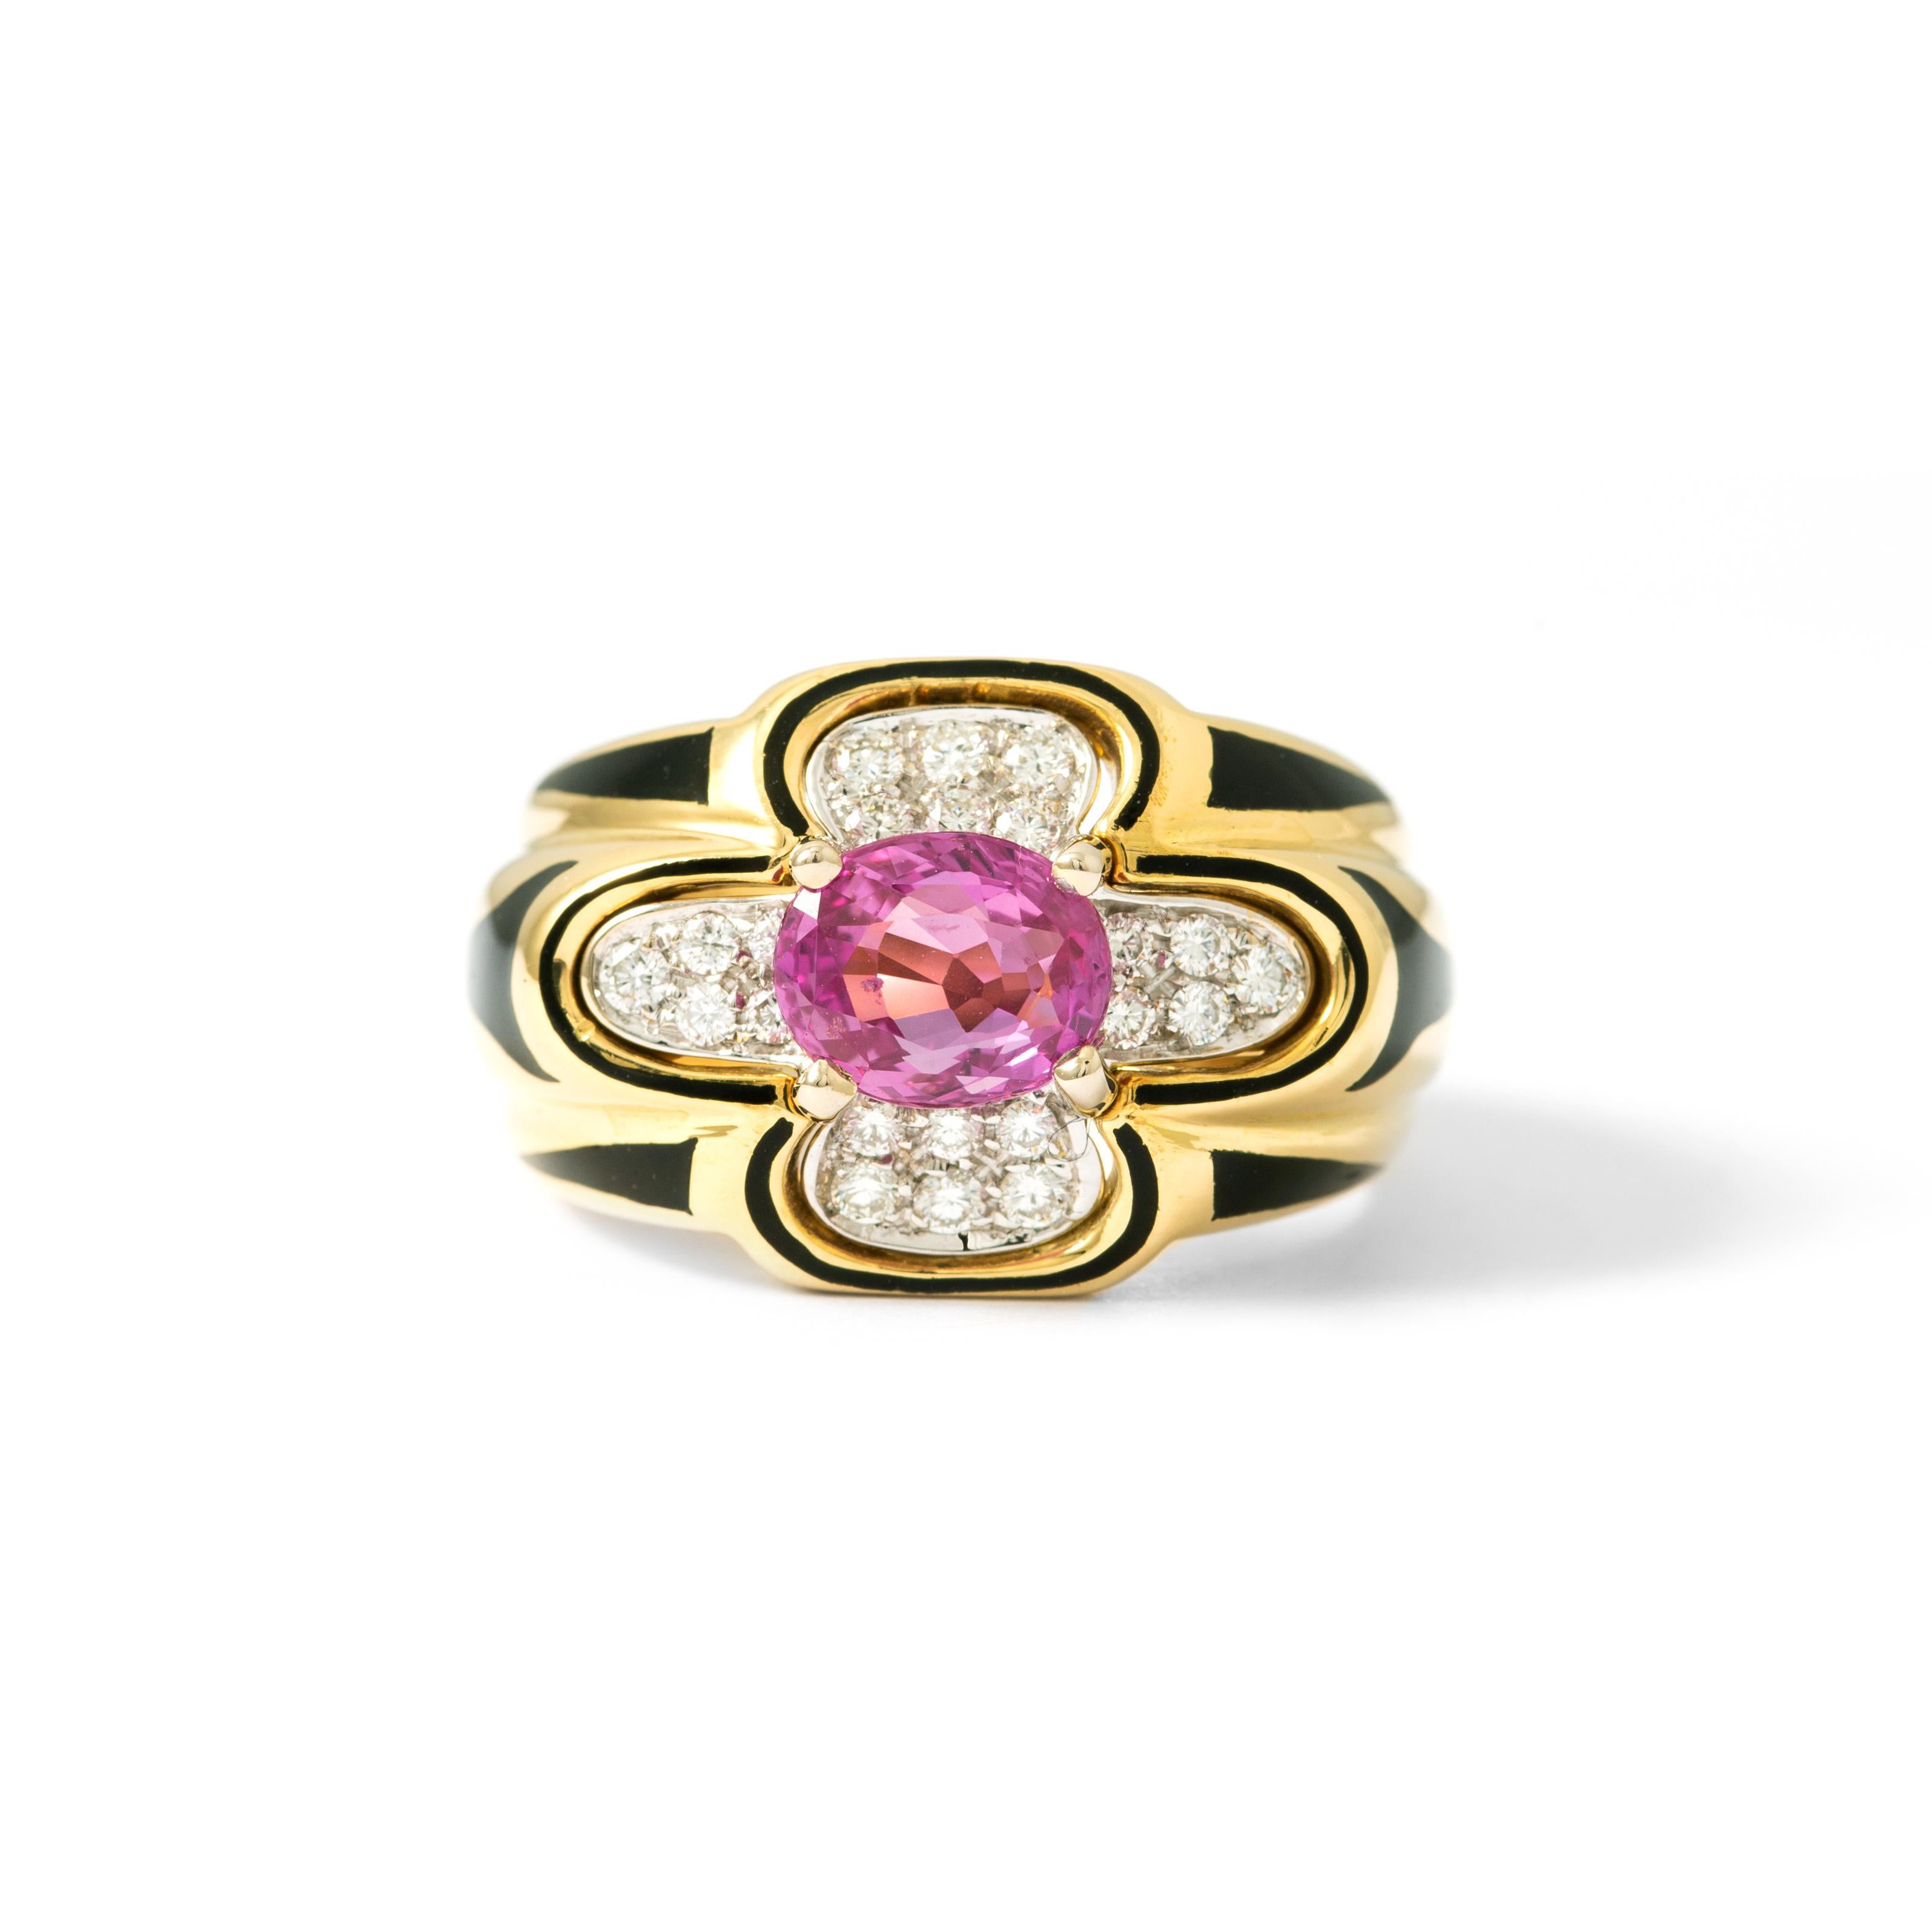 Ring in 18kt yellow gold set with one pink oval cut sapphire 1.40 cts and 22 diamonds 0.24 cts Size 52